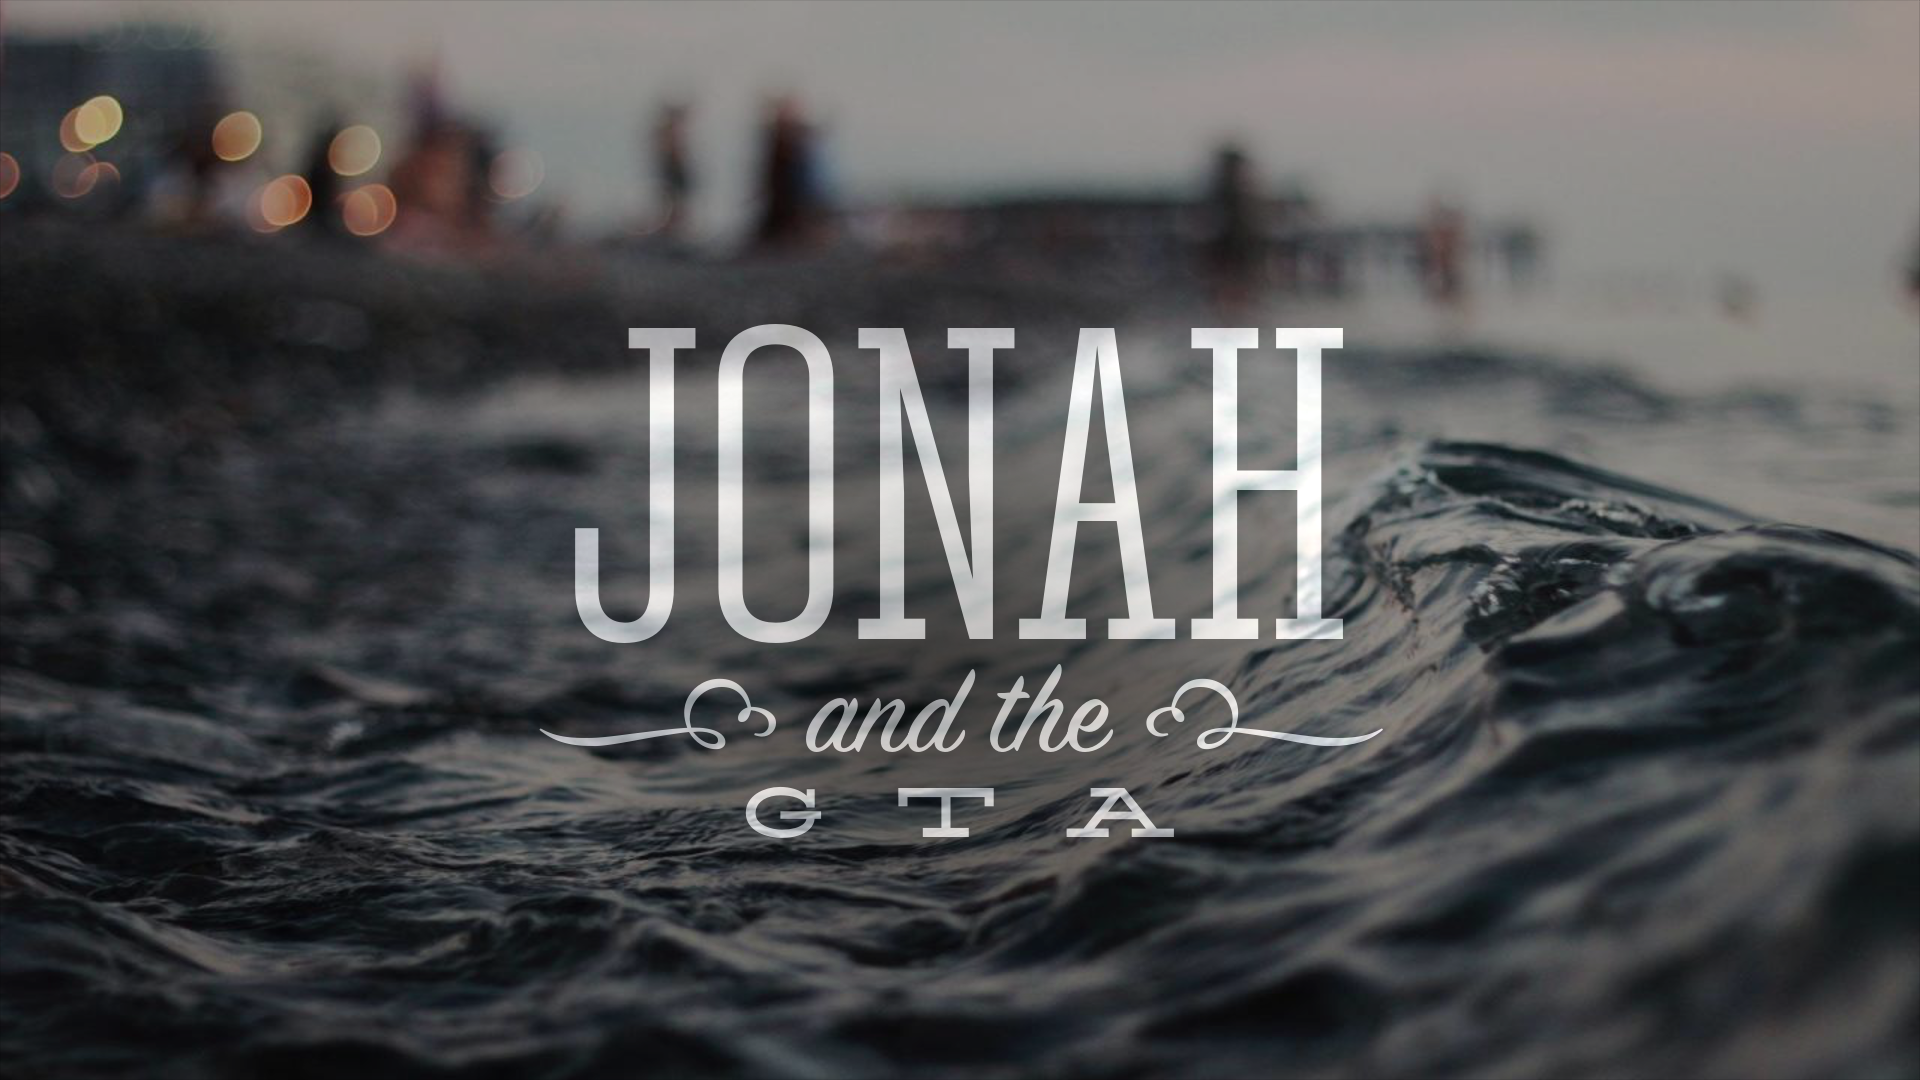 Jonah Overview & Introduction